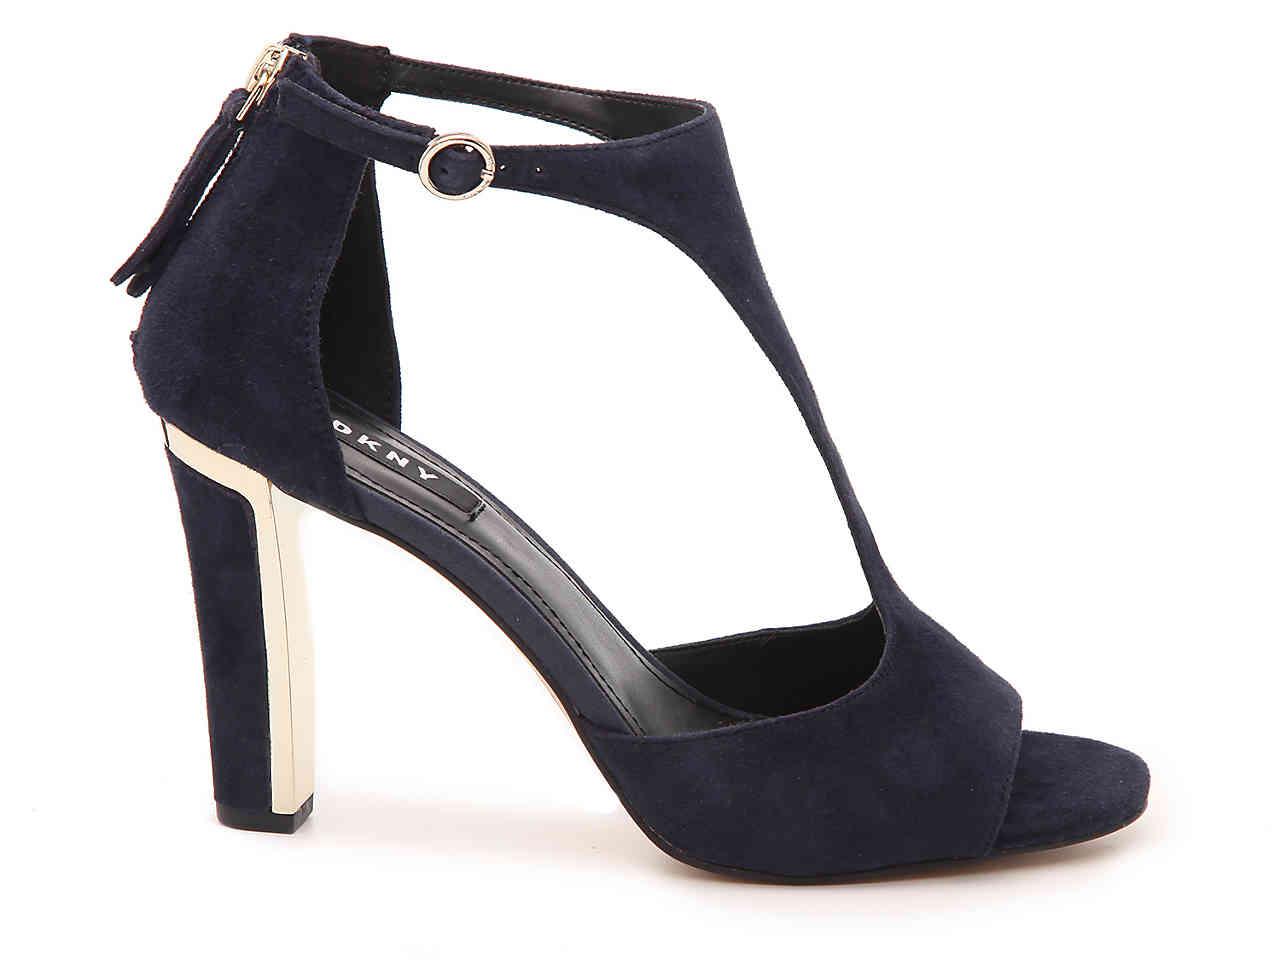 DKNY Suede Colby Sandal in Navy (Blue 